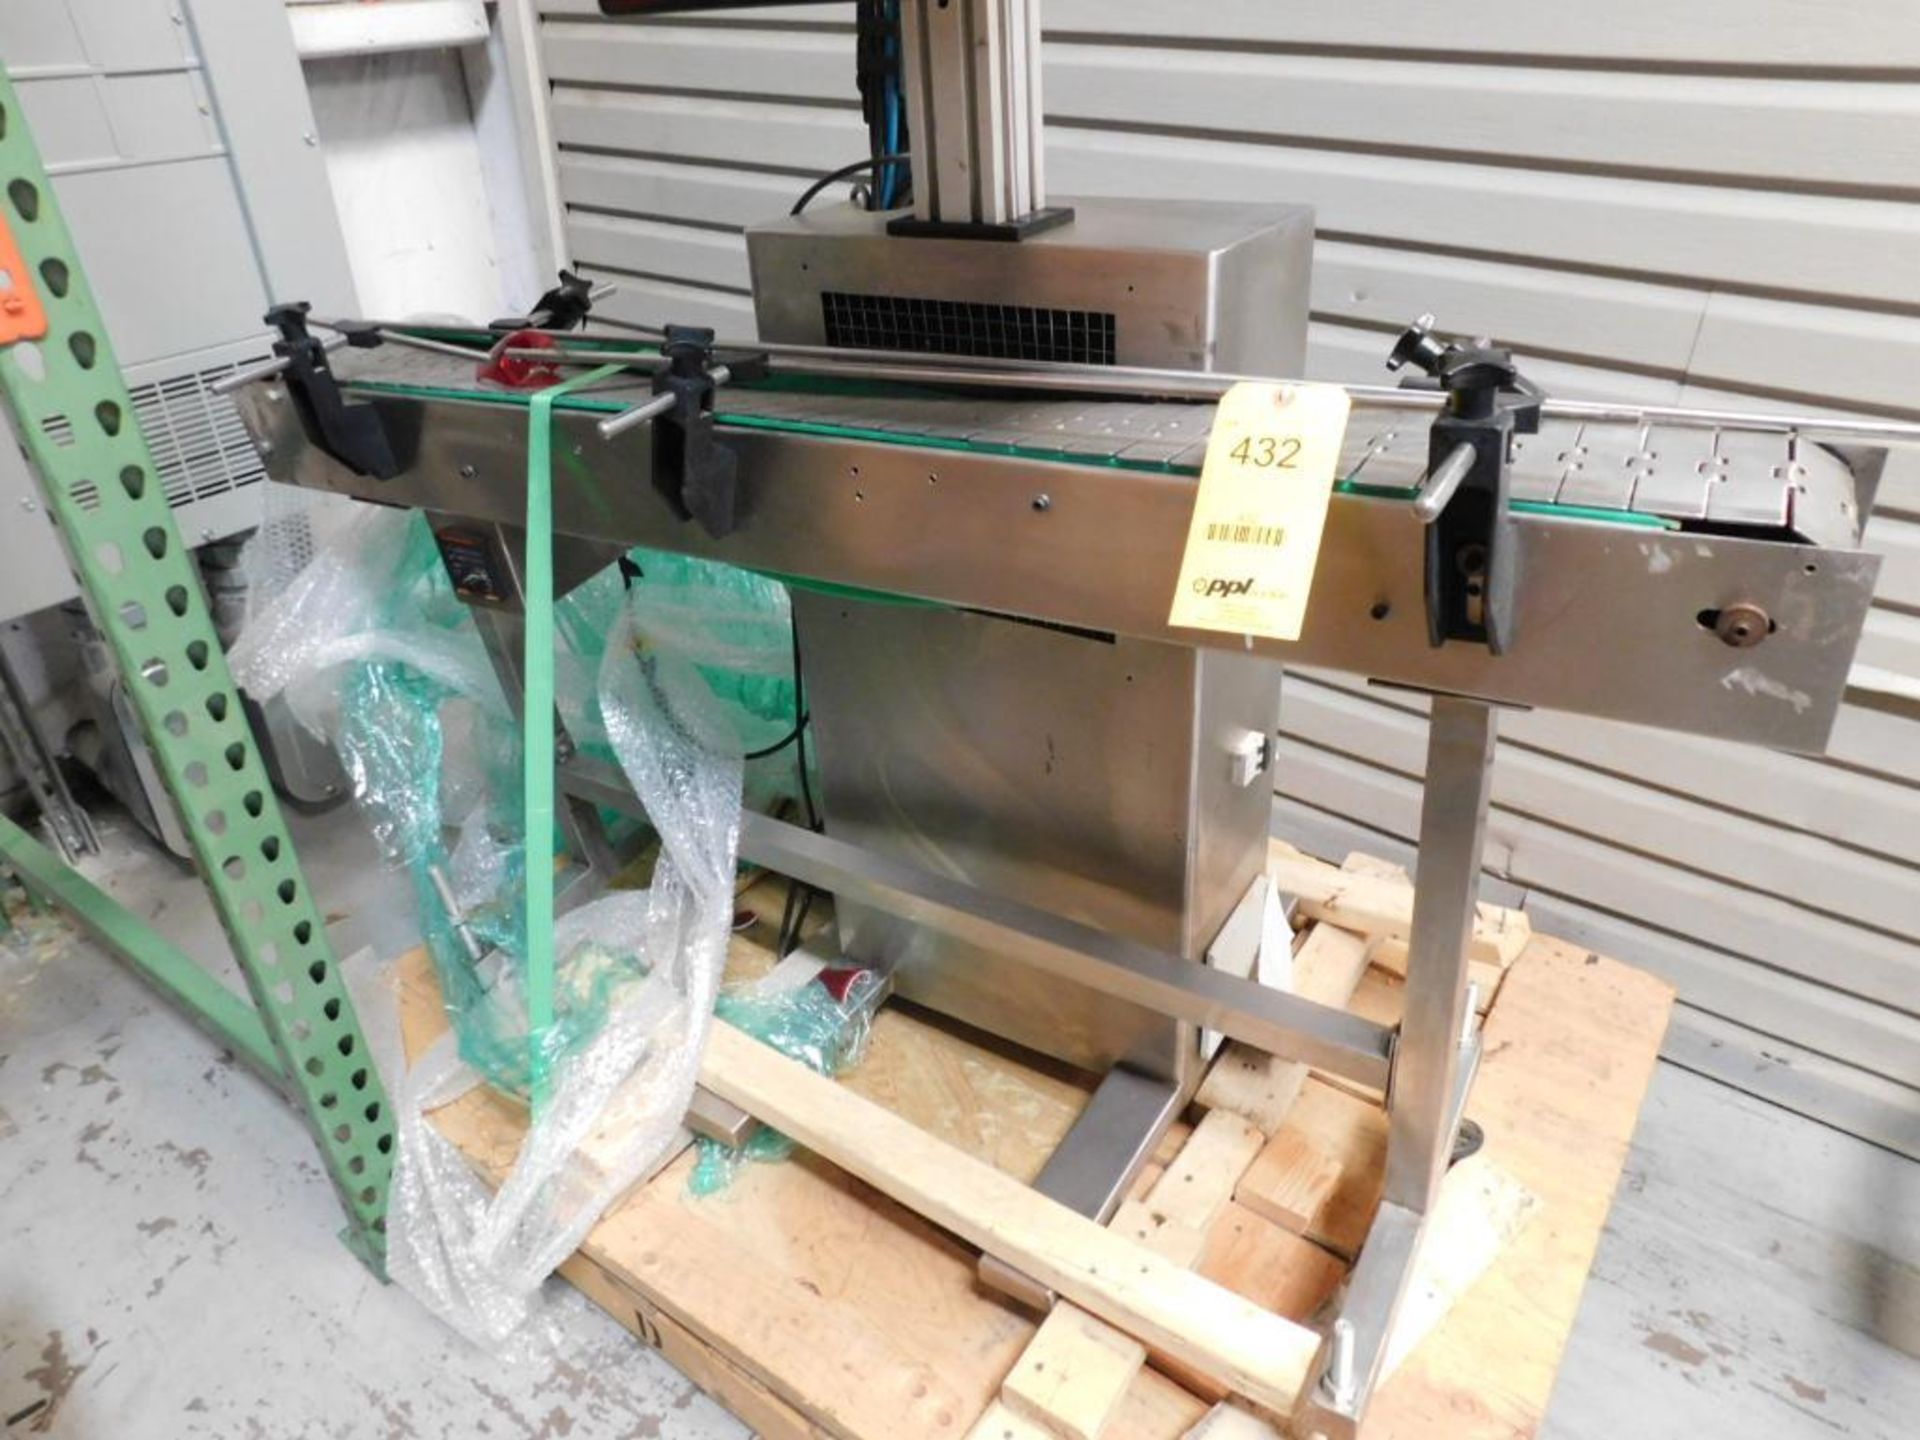 Induction Sealing Machine Model VPM-ISM 3000, S/N AN/060/001/1516 (Building 2) (LOCATED: 3201 S. ELM - Bild 2 aus 5